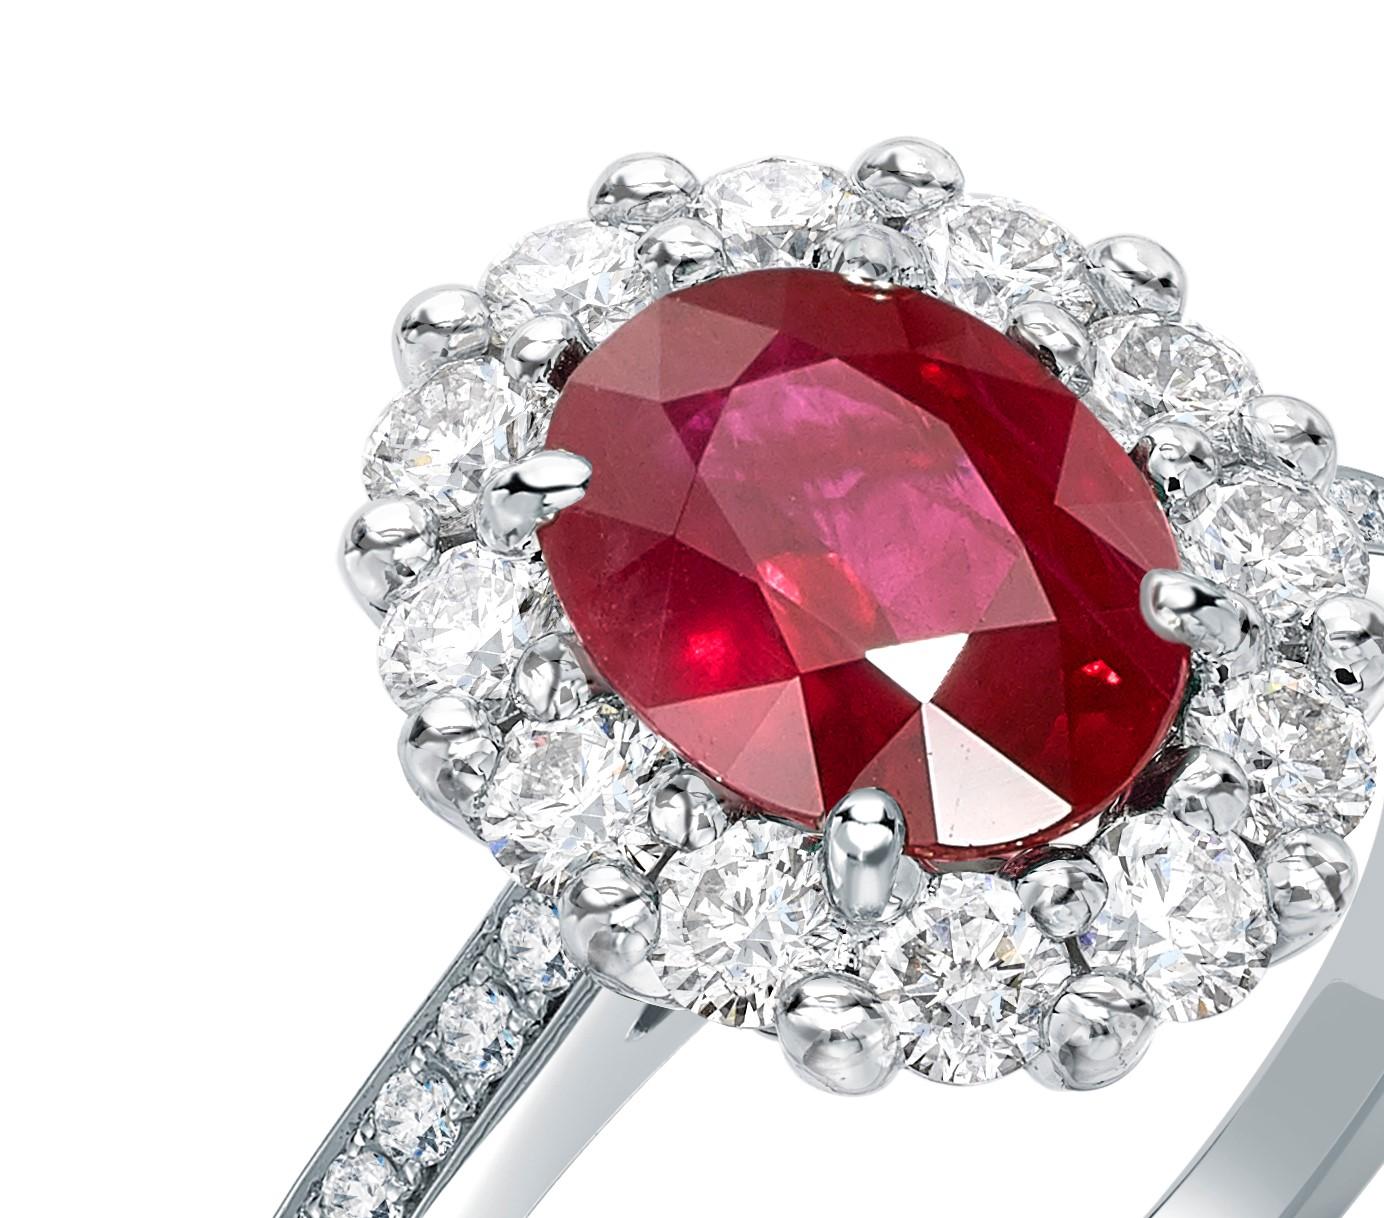 A House of Garrard platinum ring from the 1735 collection set with a central GIA certified oval ruby weighing 1.63 carats and 34 round white diamonds weighing 0.60 carats.

Size: 53 / 6.5 (Ring can be sized up or down; by two sizes)
1 oval ruby